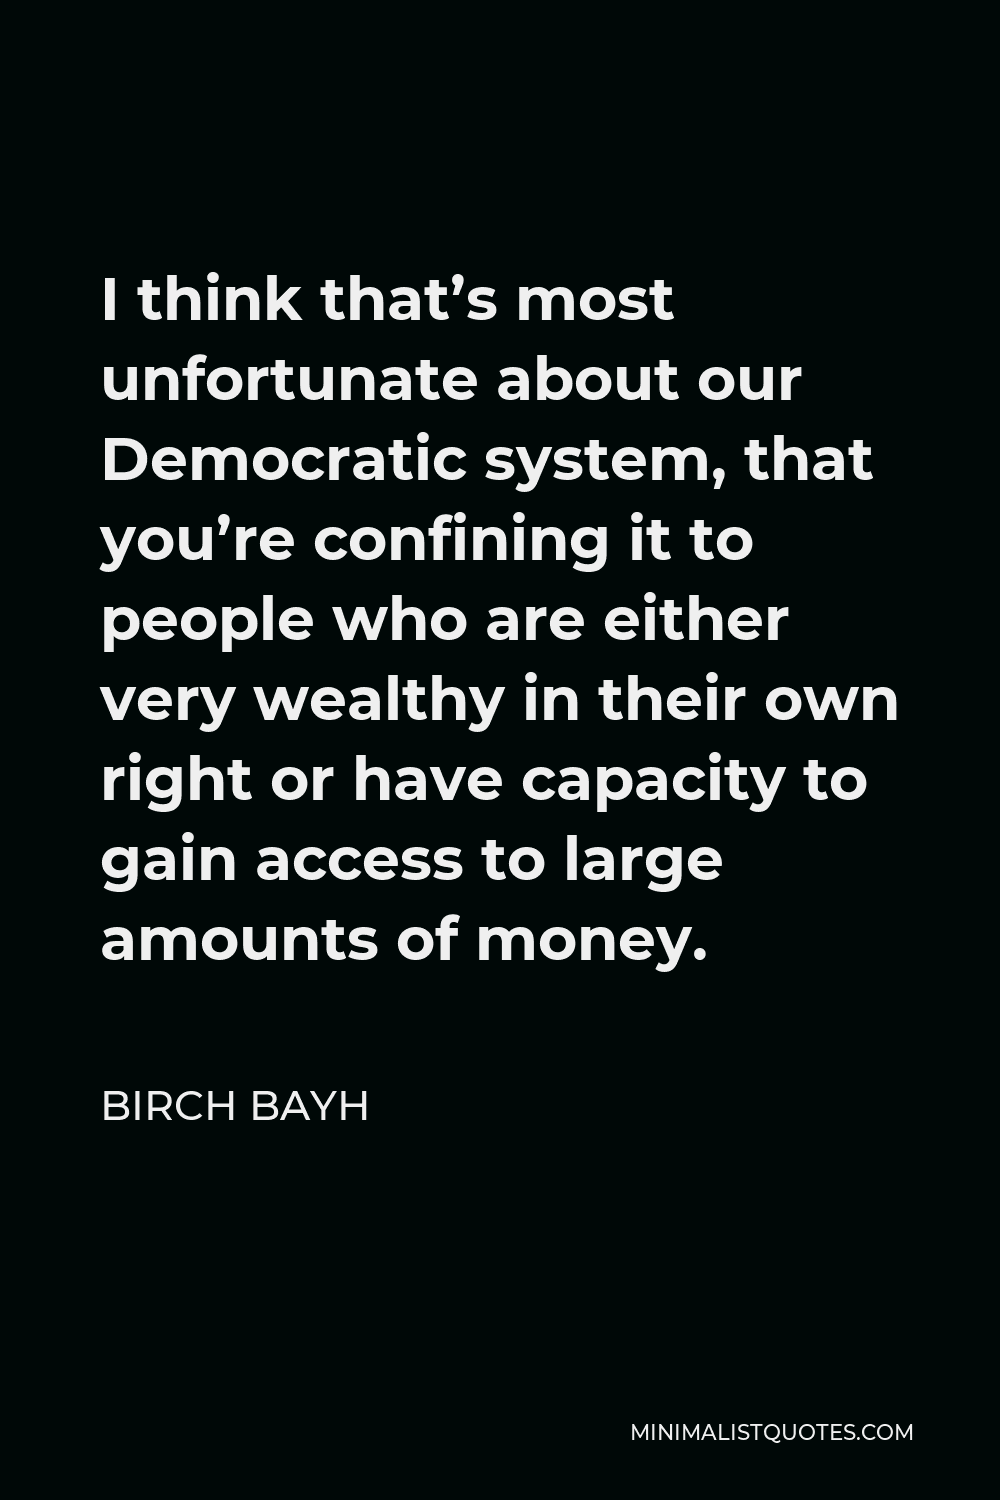 Birch Bayh Quote - I think that’s most unfortunate about our Democratic system, that you’re confining it to people who are either very wealthy in their own right or have capacity to gain access to large amounts of money.